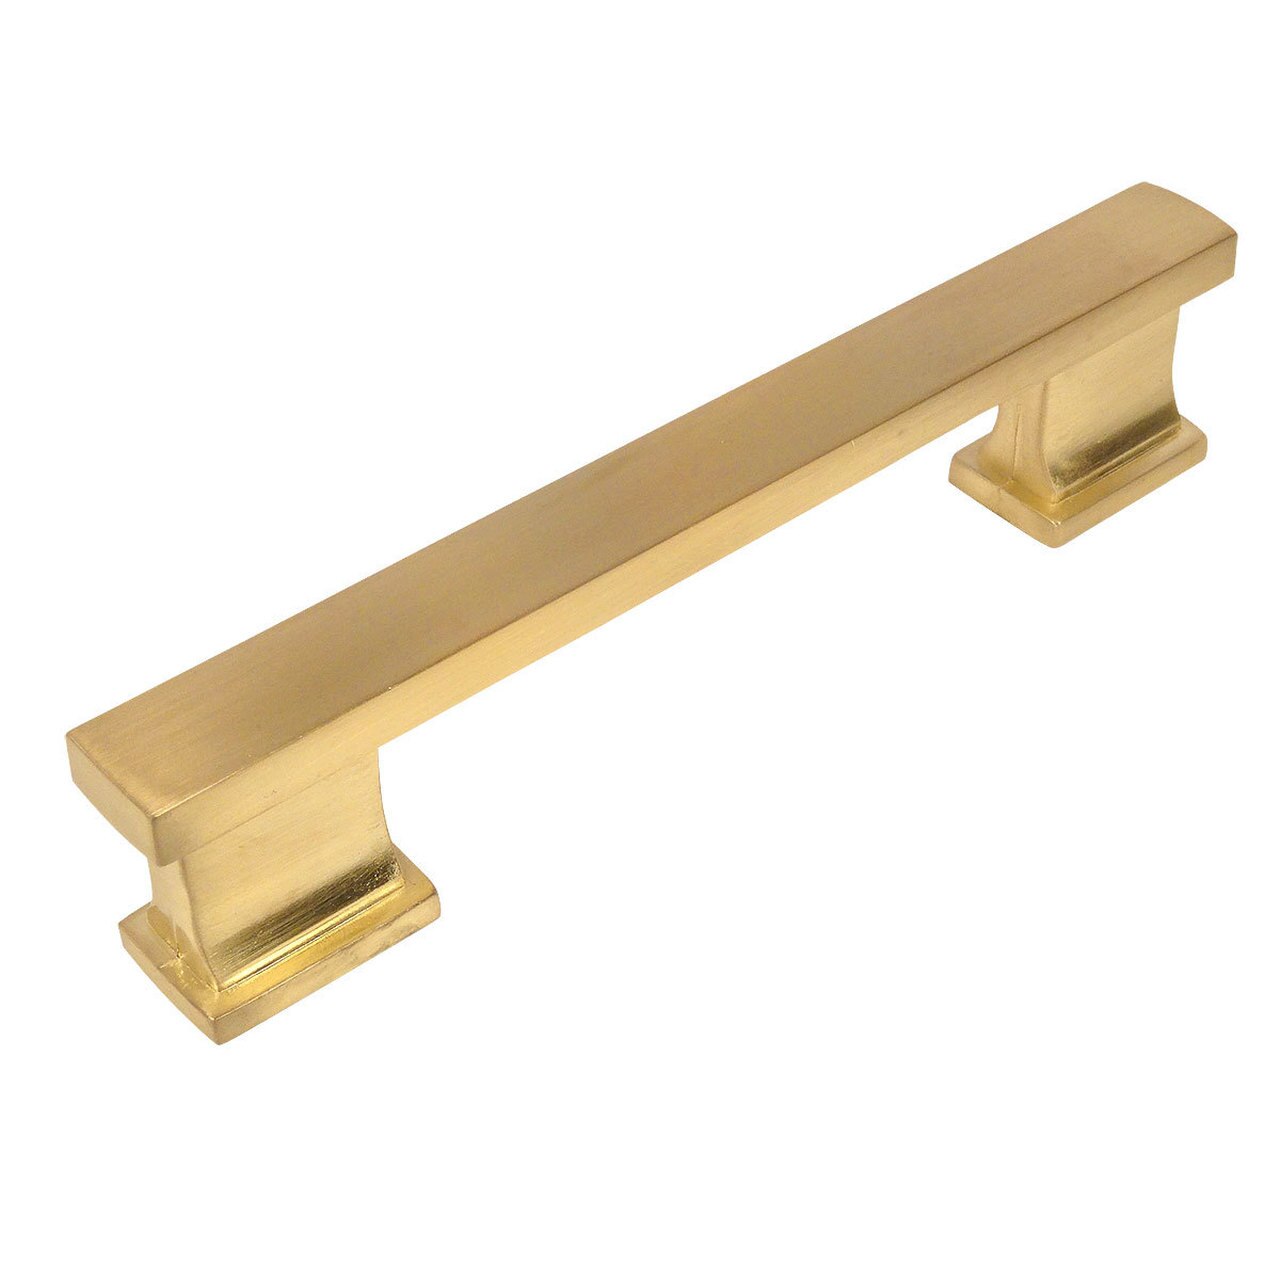 Cosmas 702-3.5BB Brushed Brass Contemporary Cabinet Pull